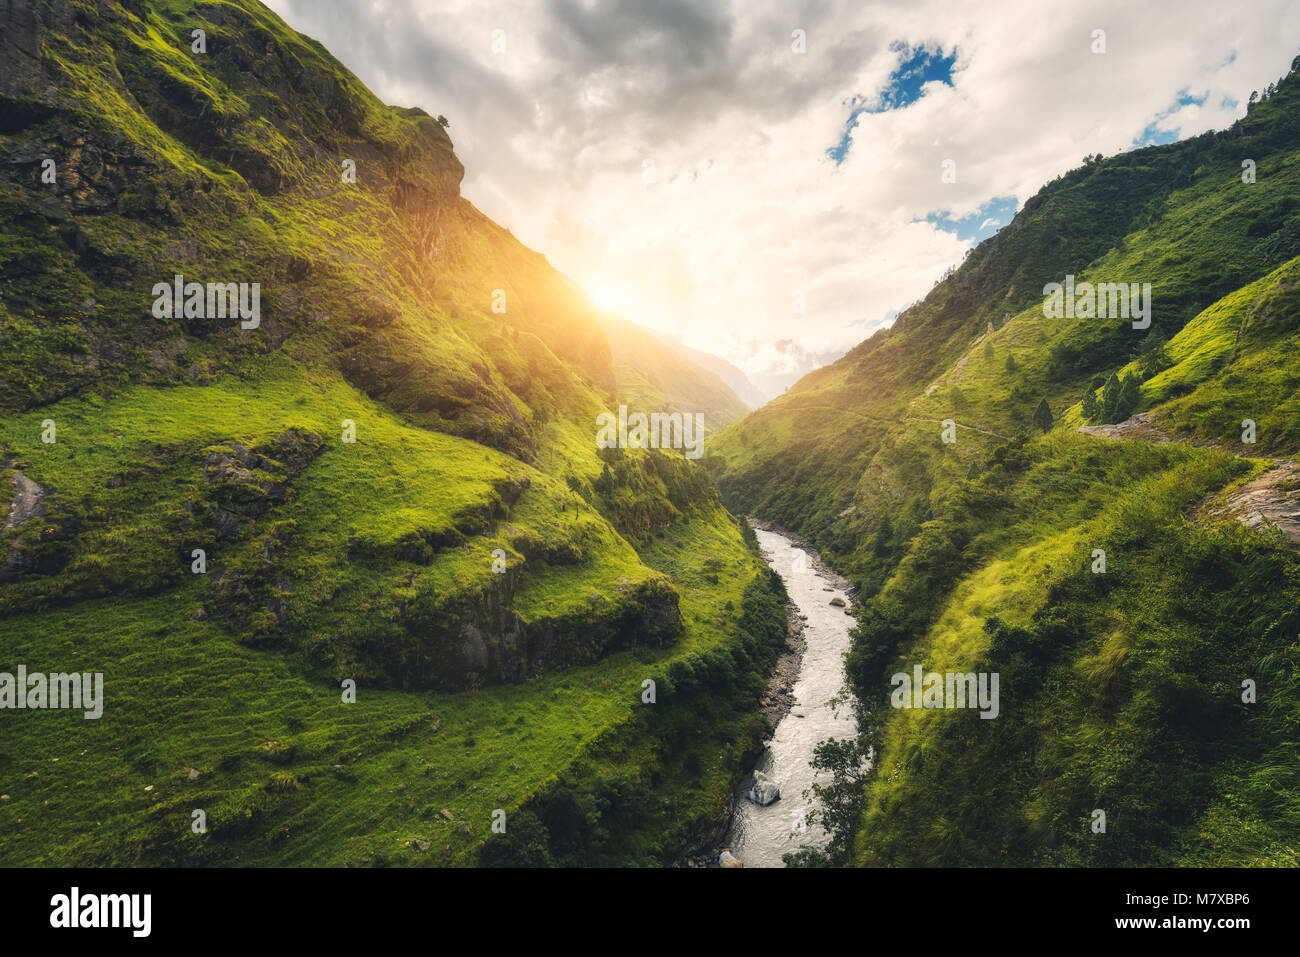 View with amazing mountains covered green grass, river, meadows and forest, blue sky with clouds, sun in autumn in Nepal at sunset. Mountain valley at Stock Photo